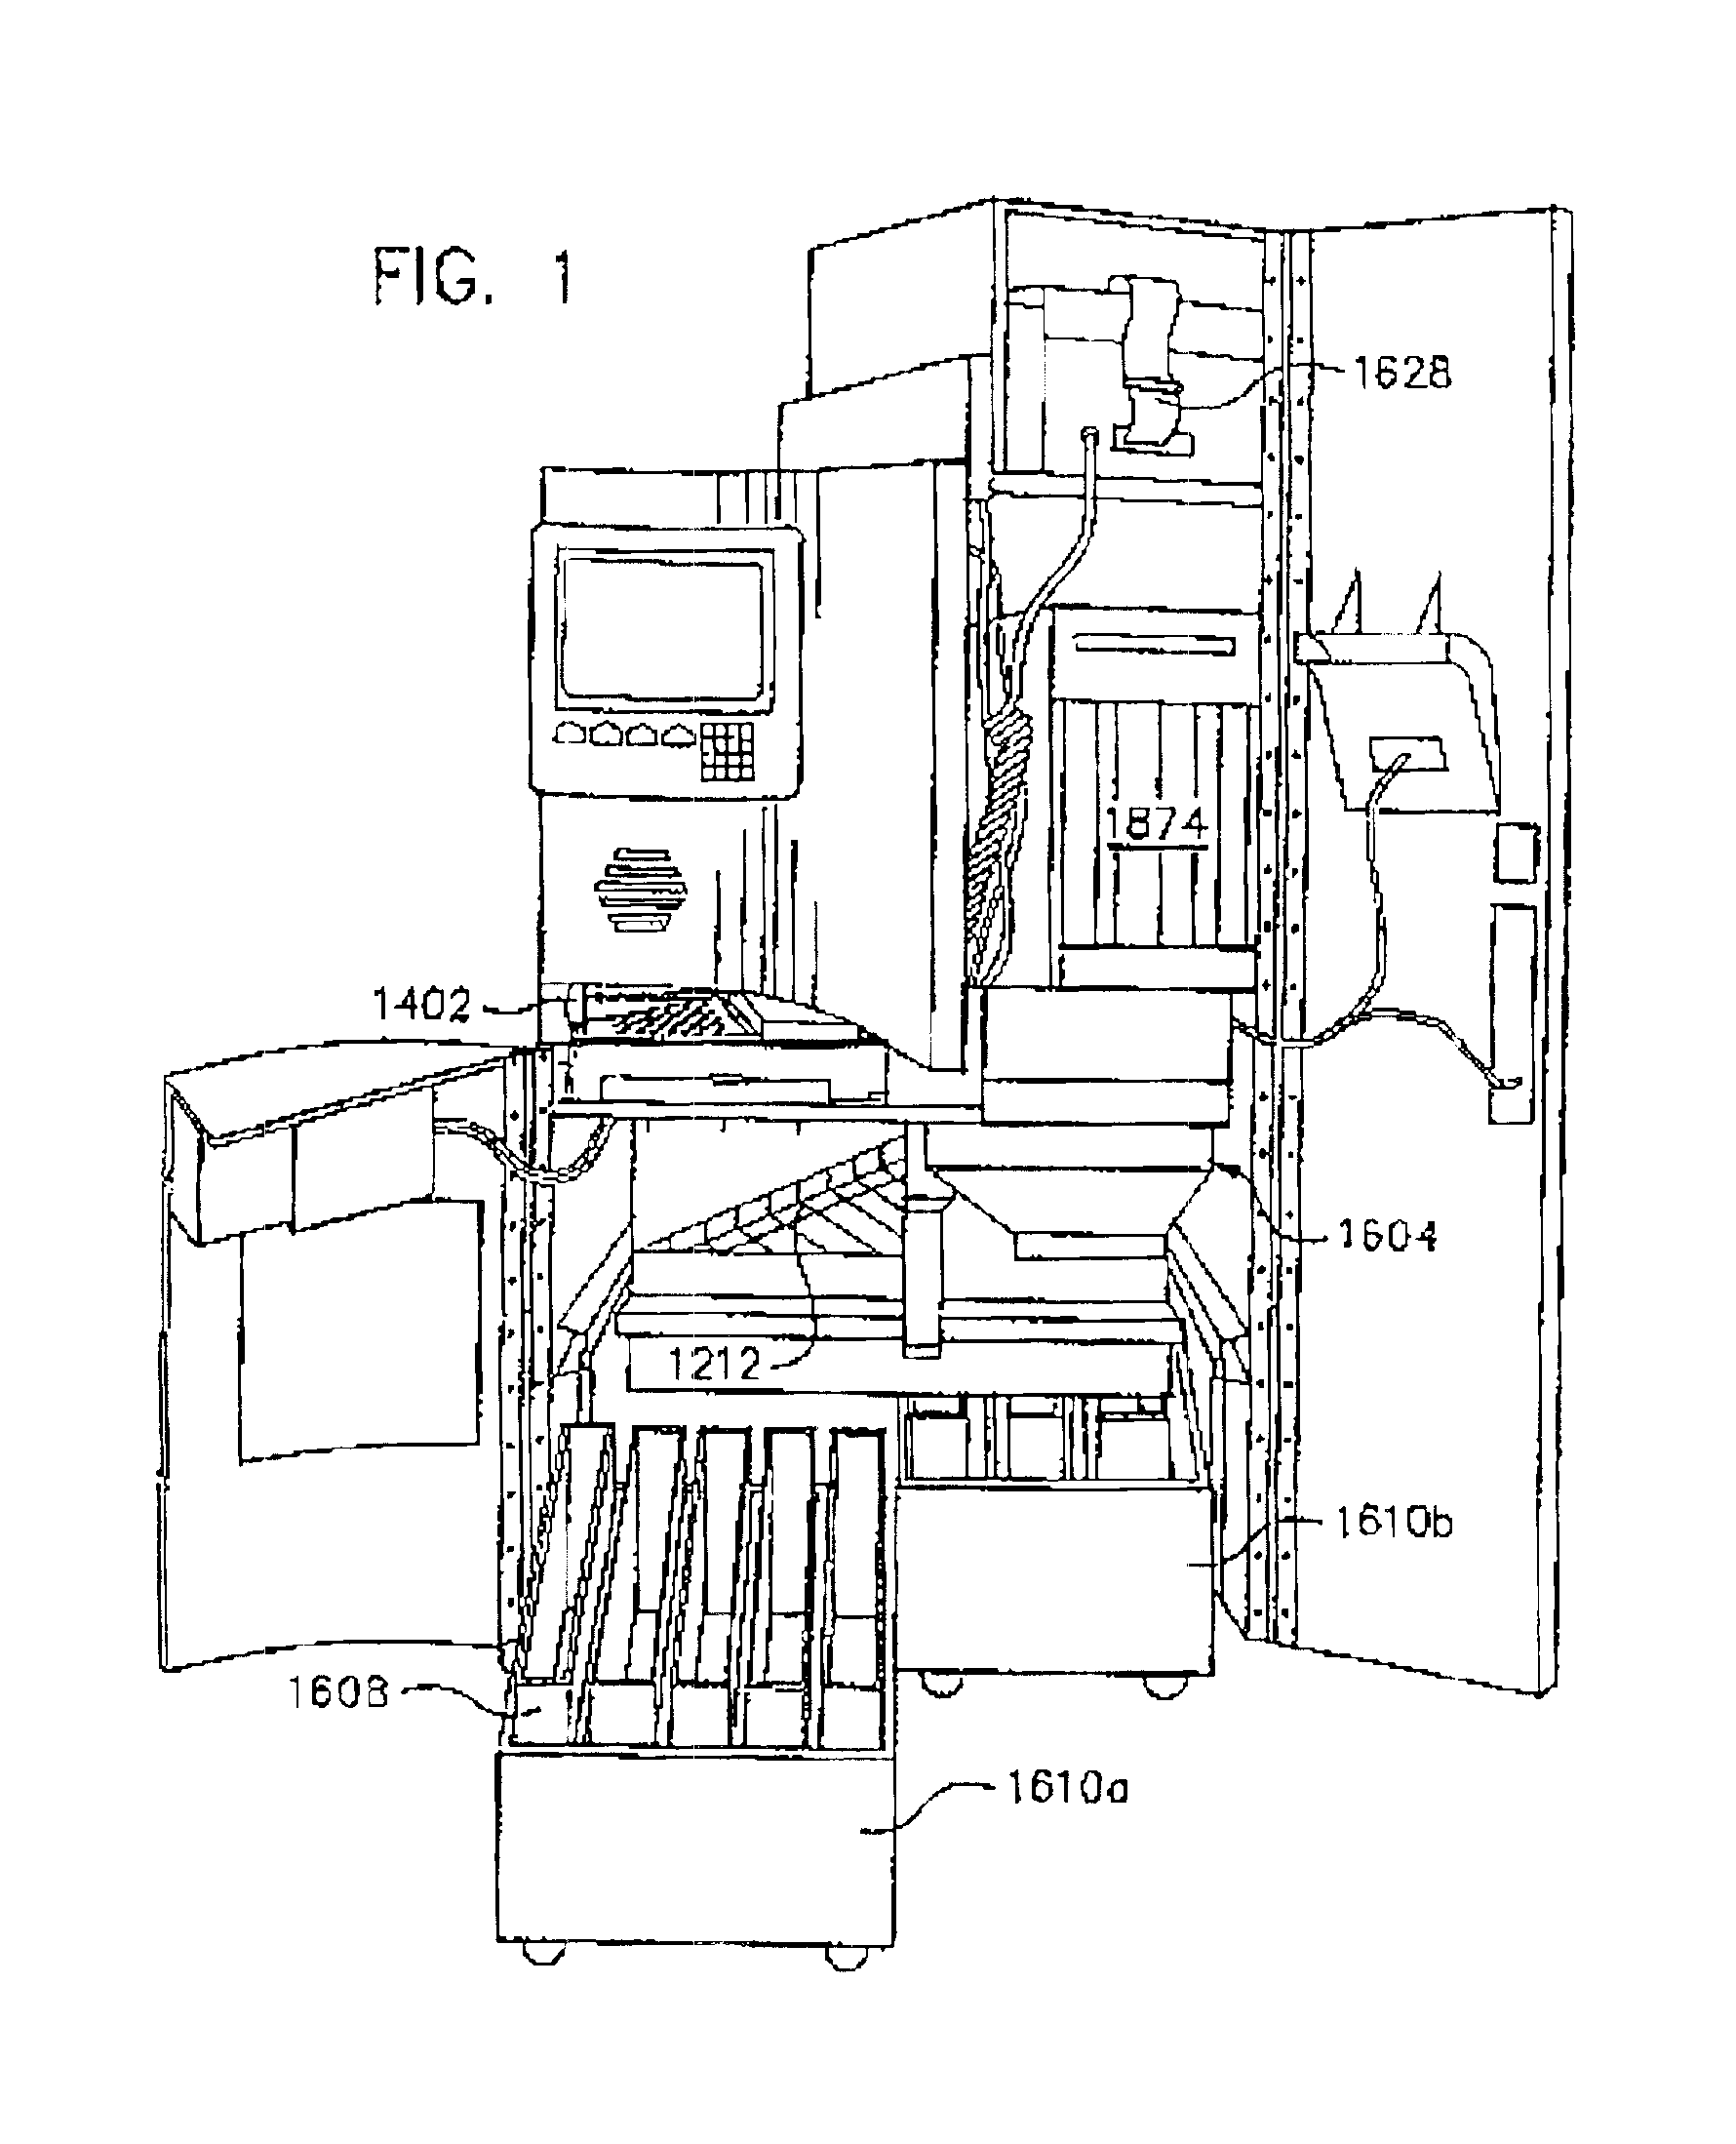 Method and apparatus for conditioning coins prior to discrimination